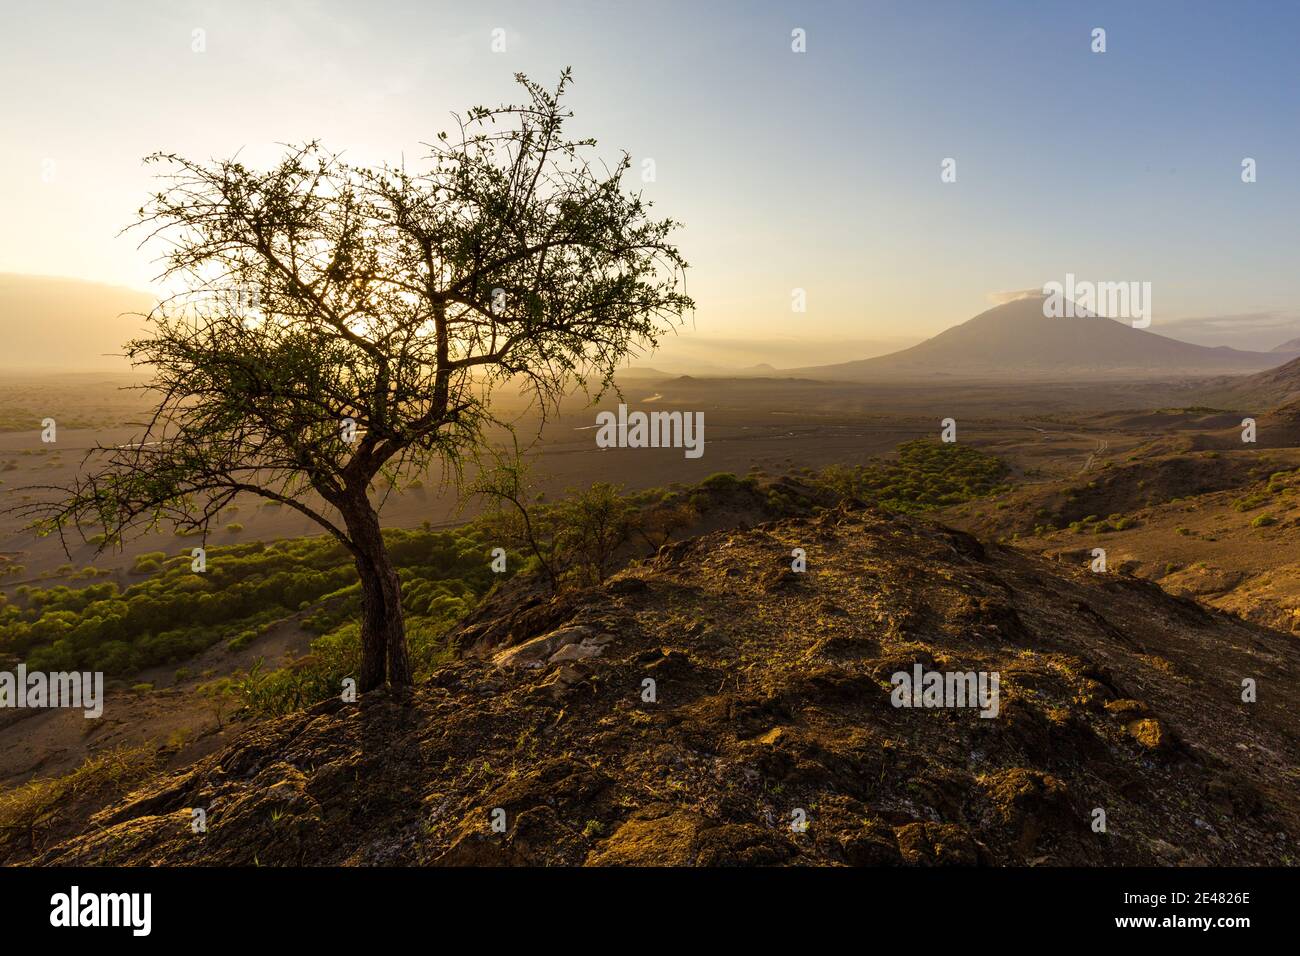 Tree in the evening light with Ol Doinyo Lengai volcano in the background, Tanzania Stock Photo